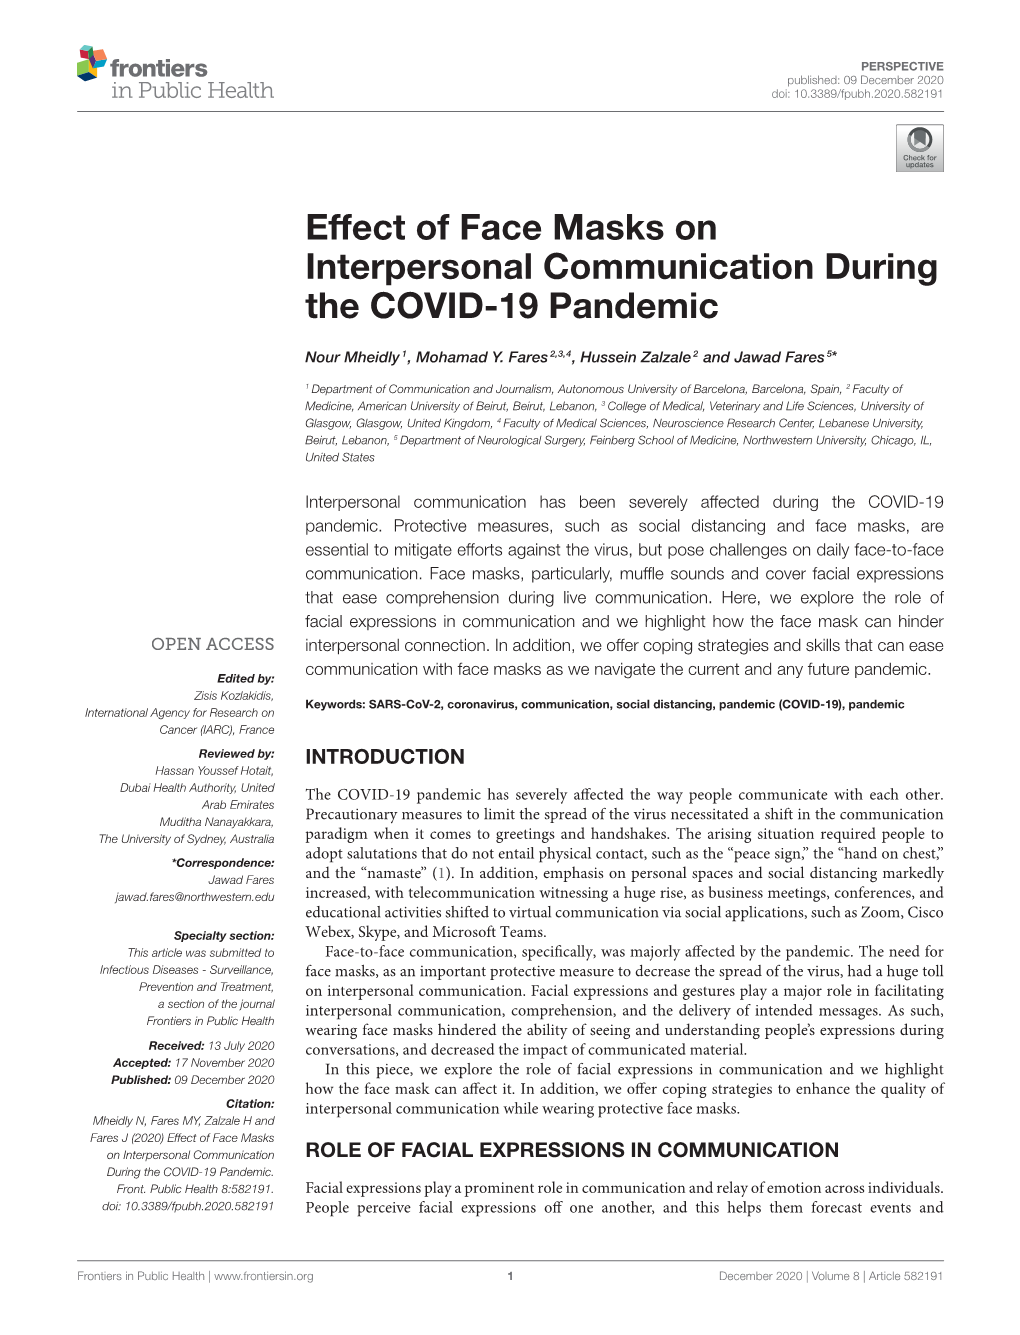 Effect of Face Masks on Interpersonal Communication During the COVID-19 Pandemic